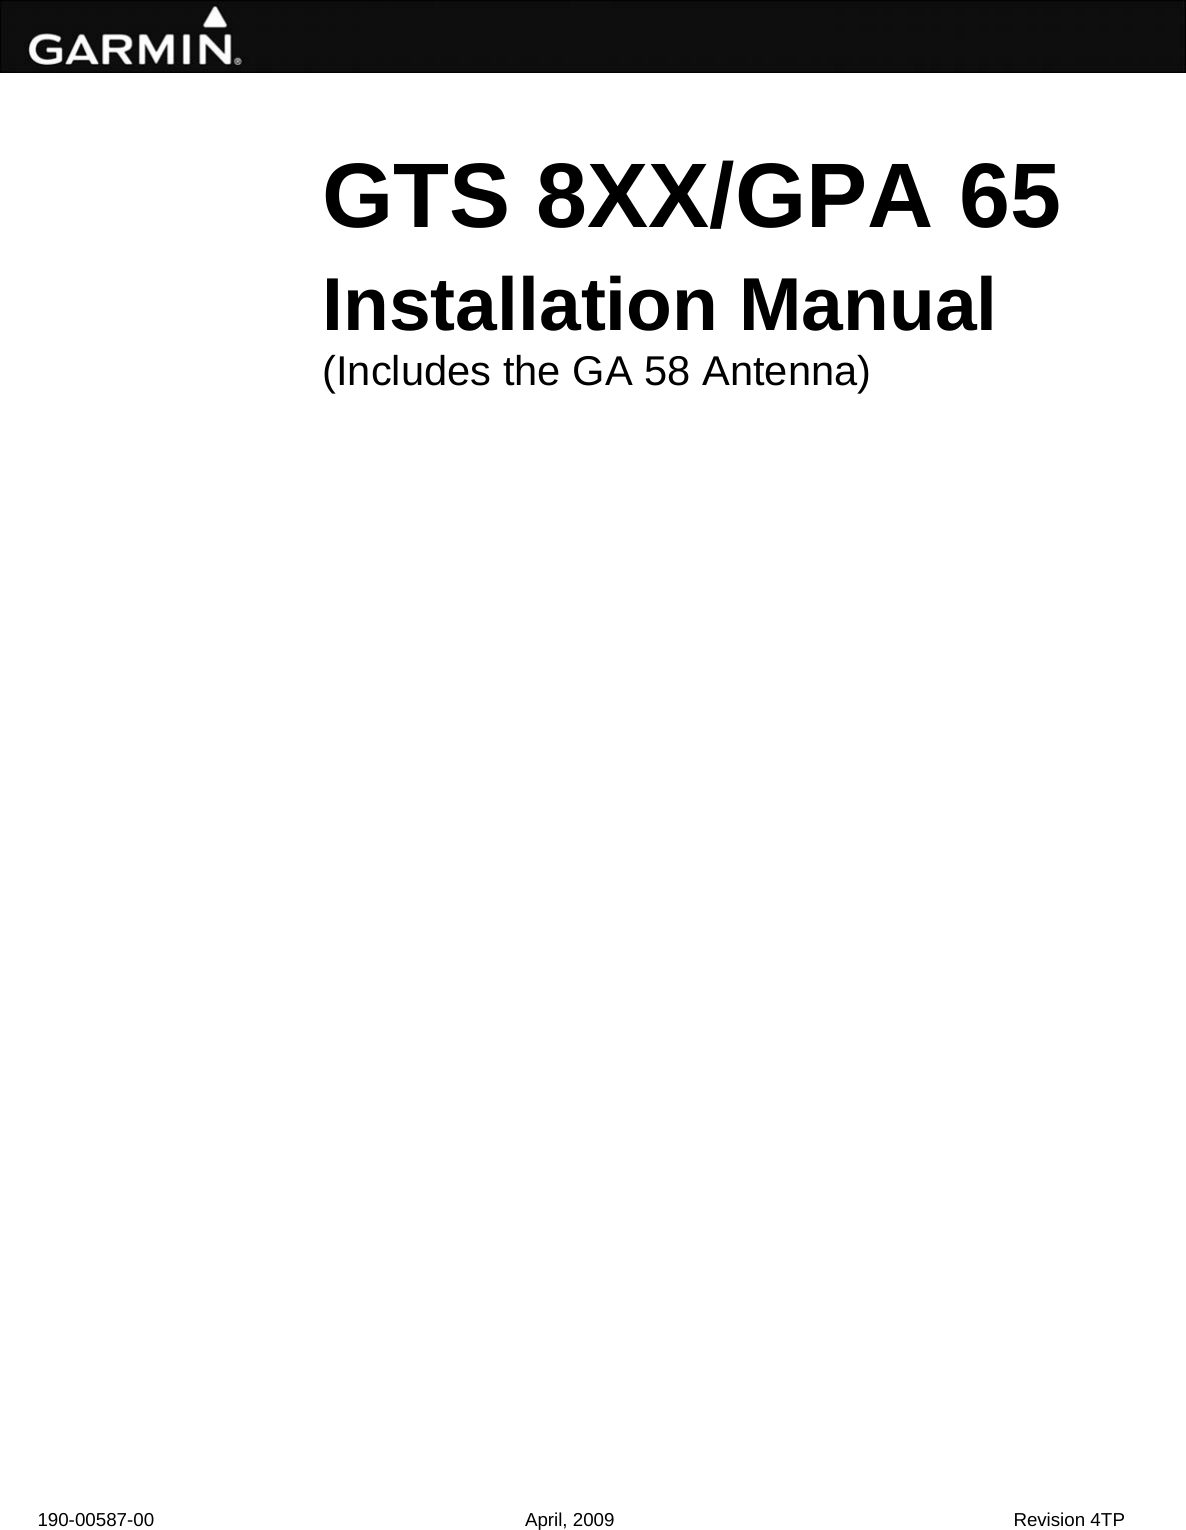 190-00587-00  April, 2009  Revision 4TP                 GTS 8XX/GPA 65Installation Manual (Includes the GA 58 Antenna)  